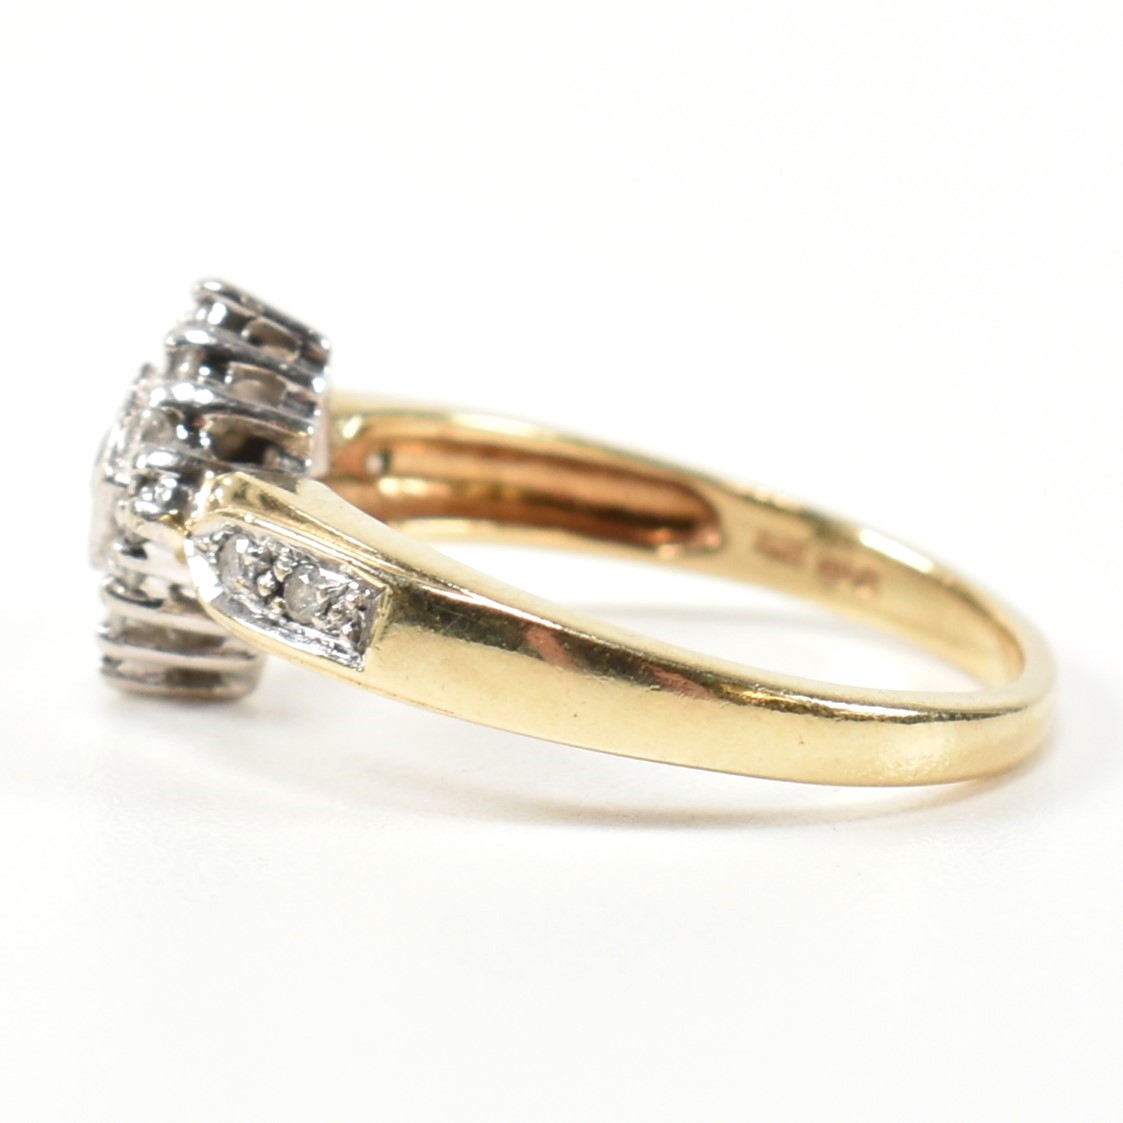 HALLMARKED 9CT GOLD & DIAMOND CLUSTER RING - Image 6 of 9